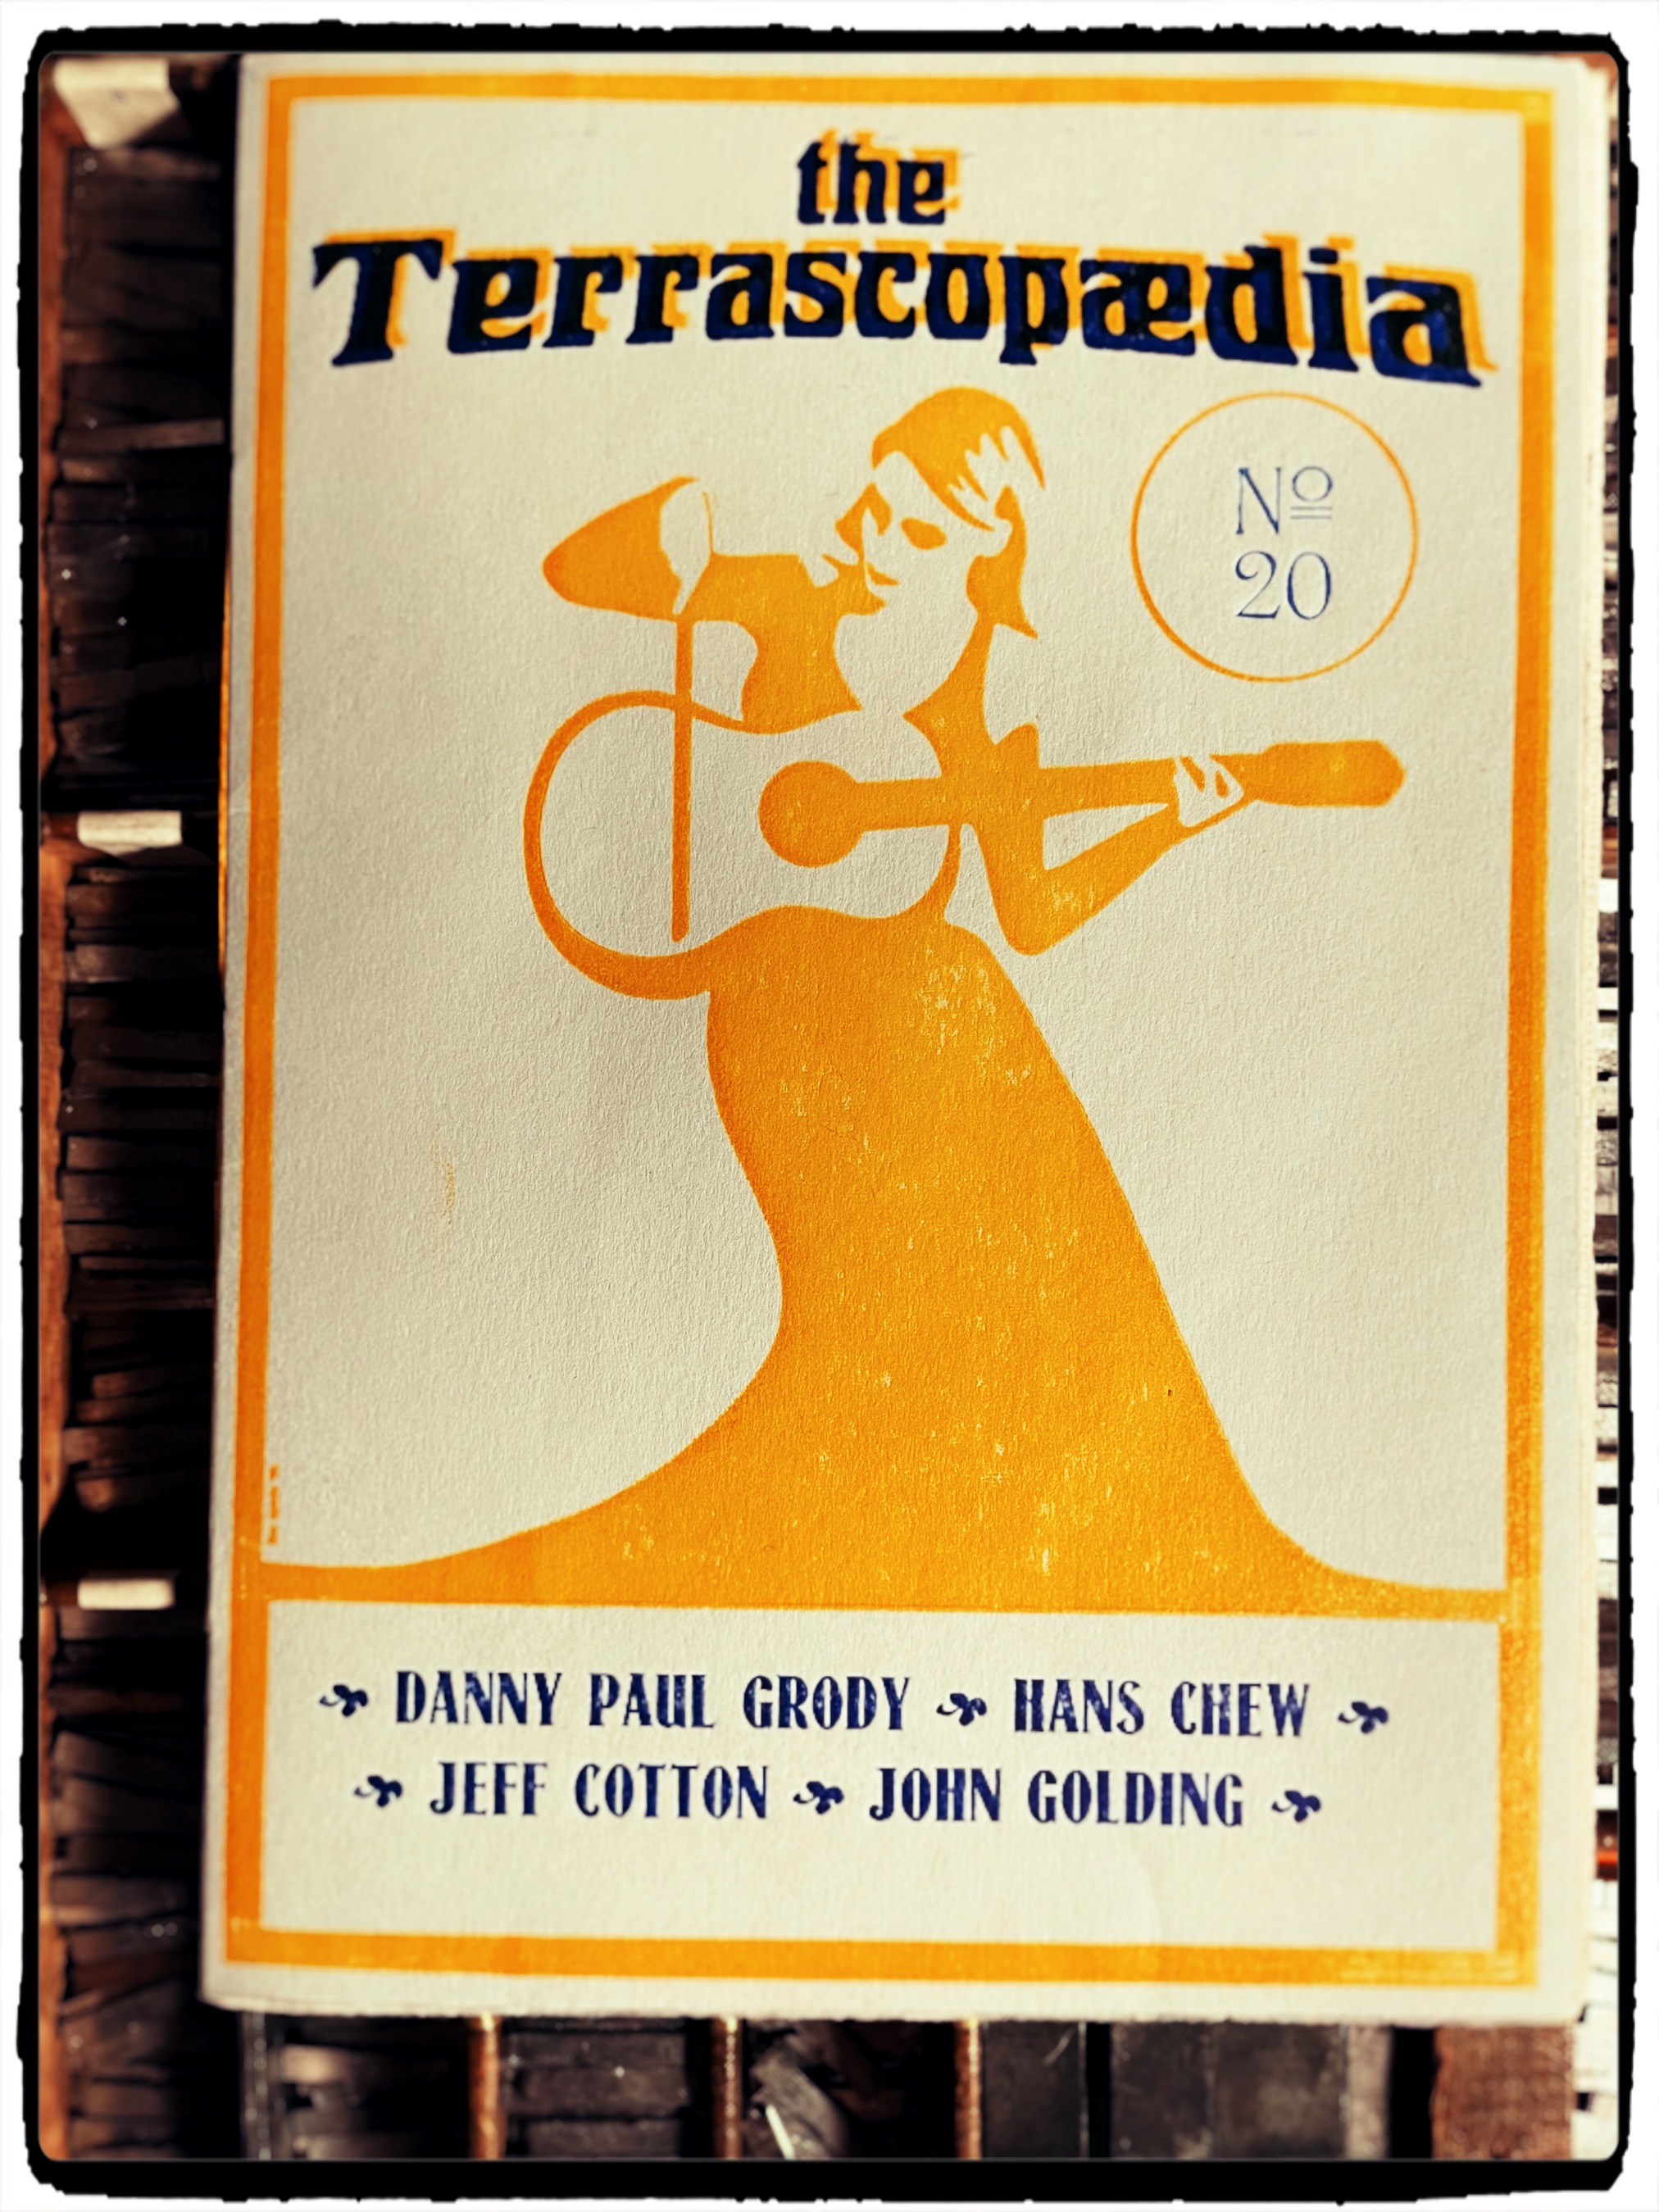 issue 20 of the magazine the Terrascopaedia featuring a lady playing a guitar with a cello bow